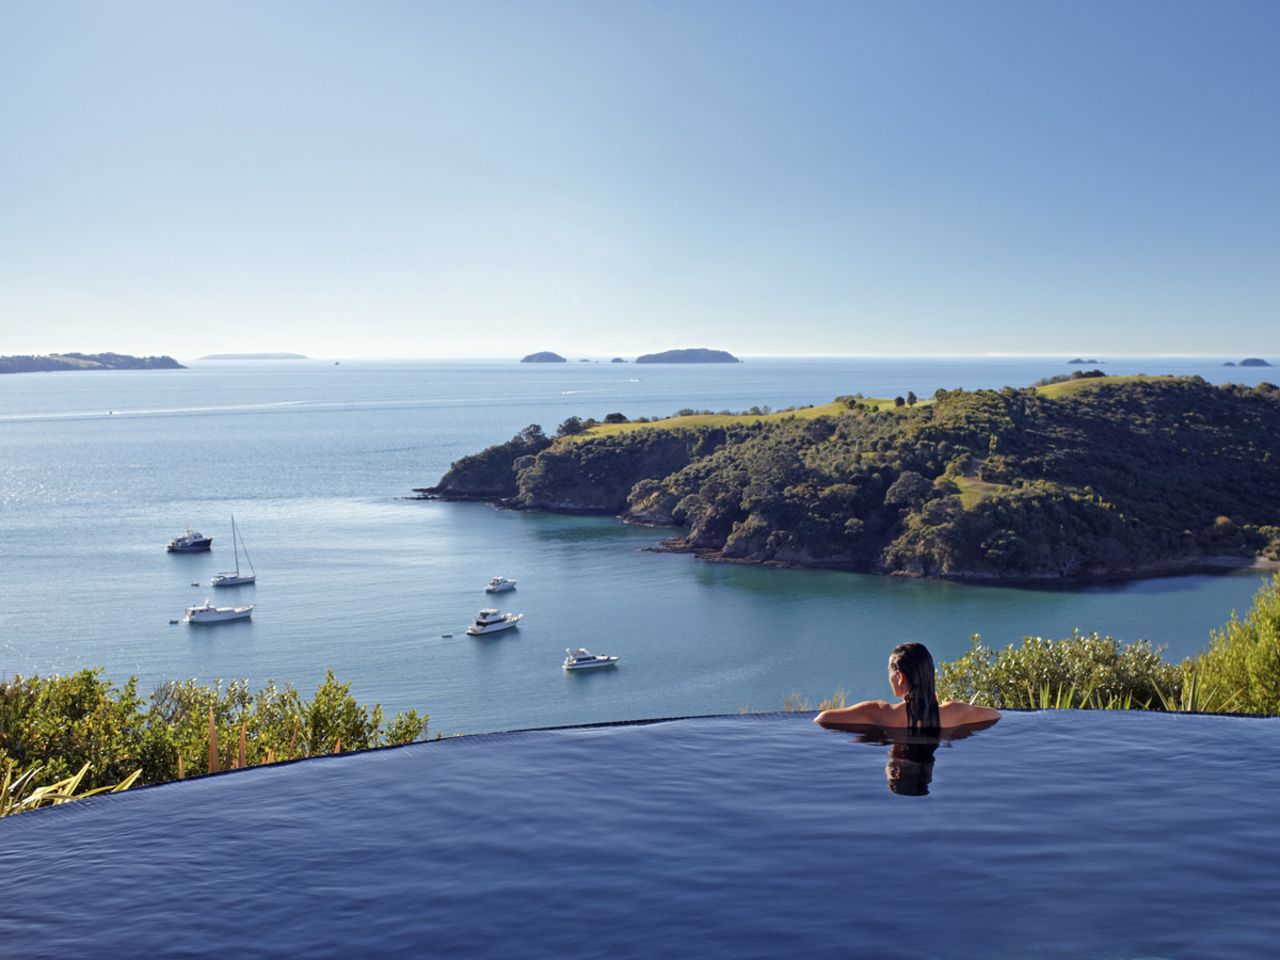 Waiheke Island's sheltered beaches, emerald bays and two dozen boutique wineries has many vacationers bypassing Auckland altogether. Delamore Lodge's infinity pool is a particularly romantic sunset lookout spot.